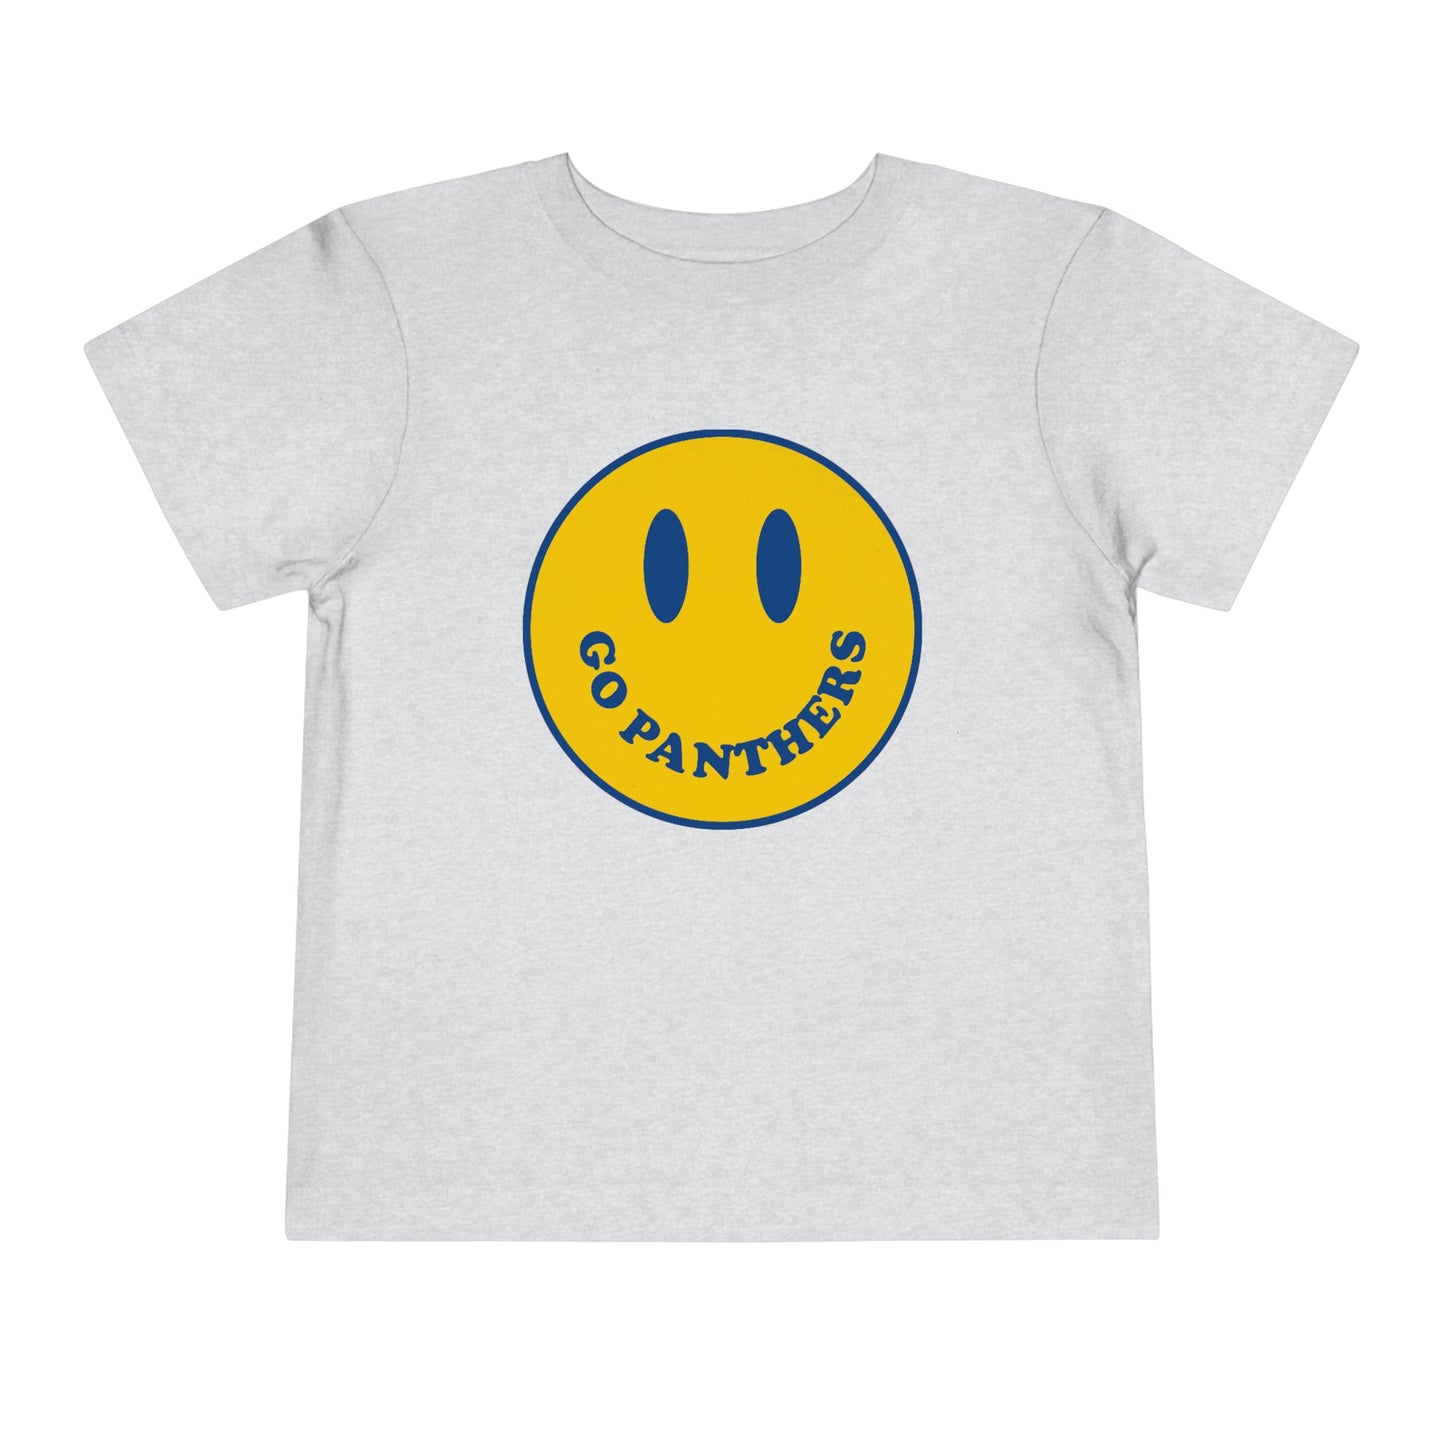 Go Panthers Smiley Toddler Tee